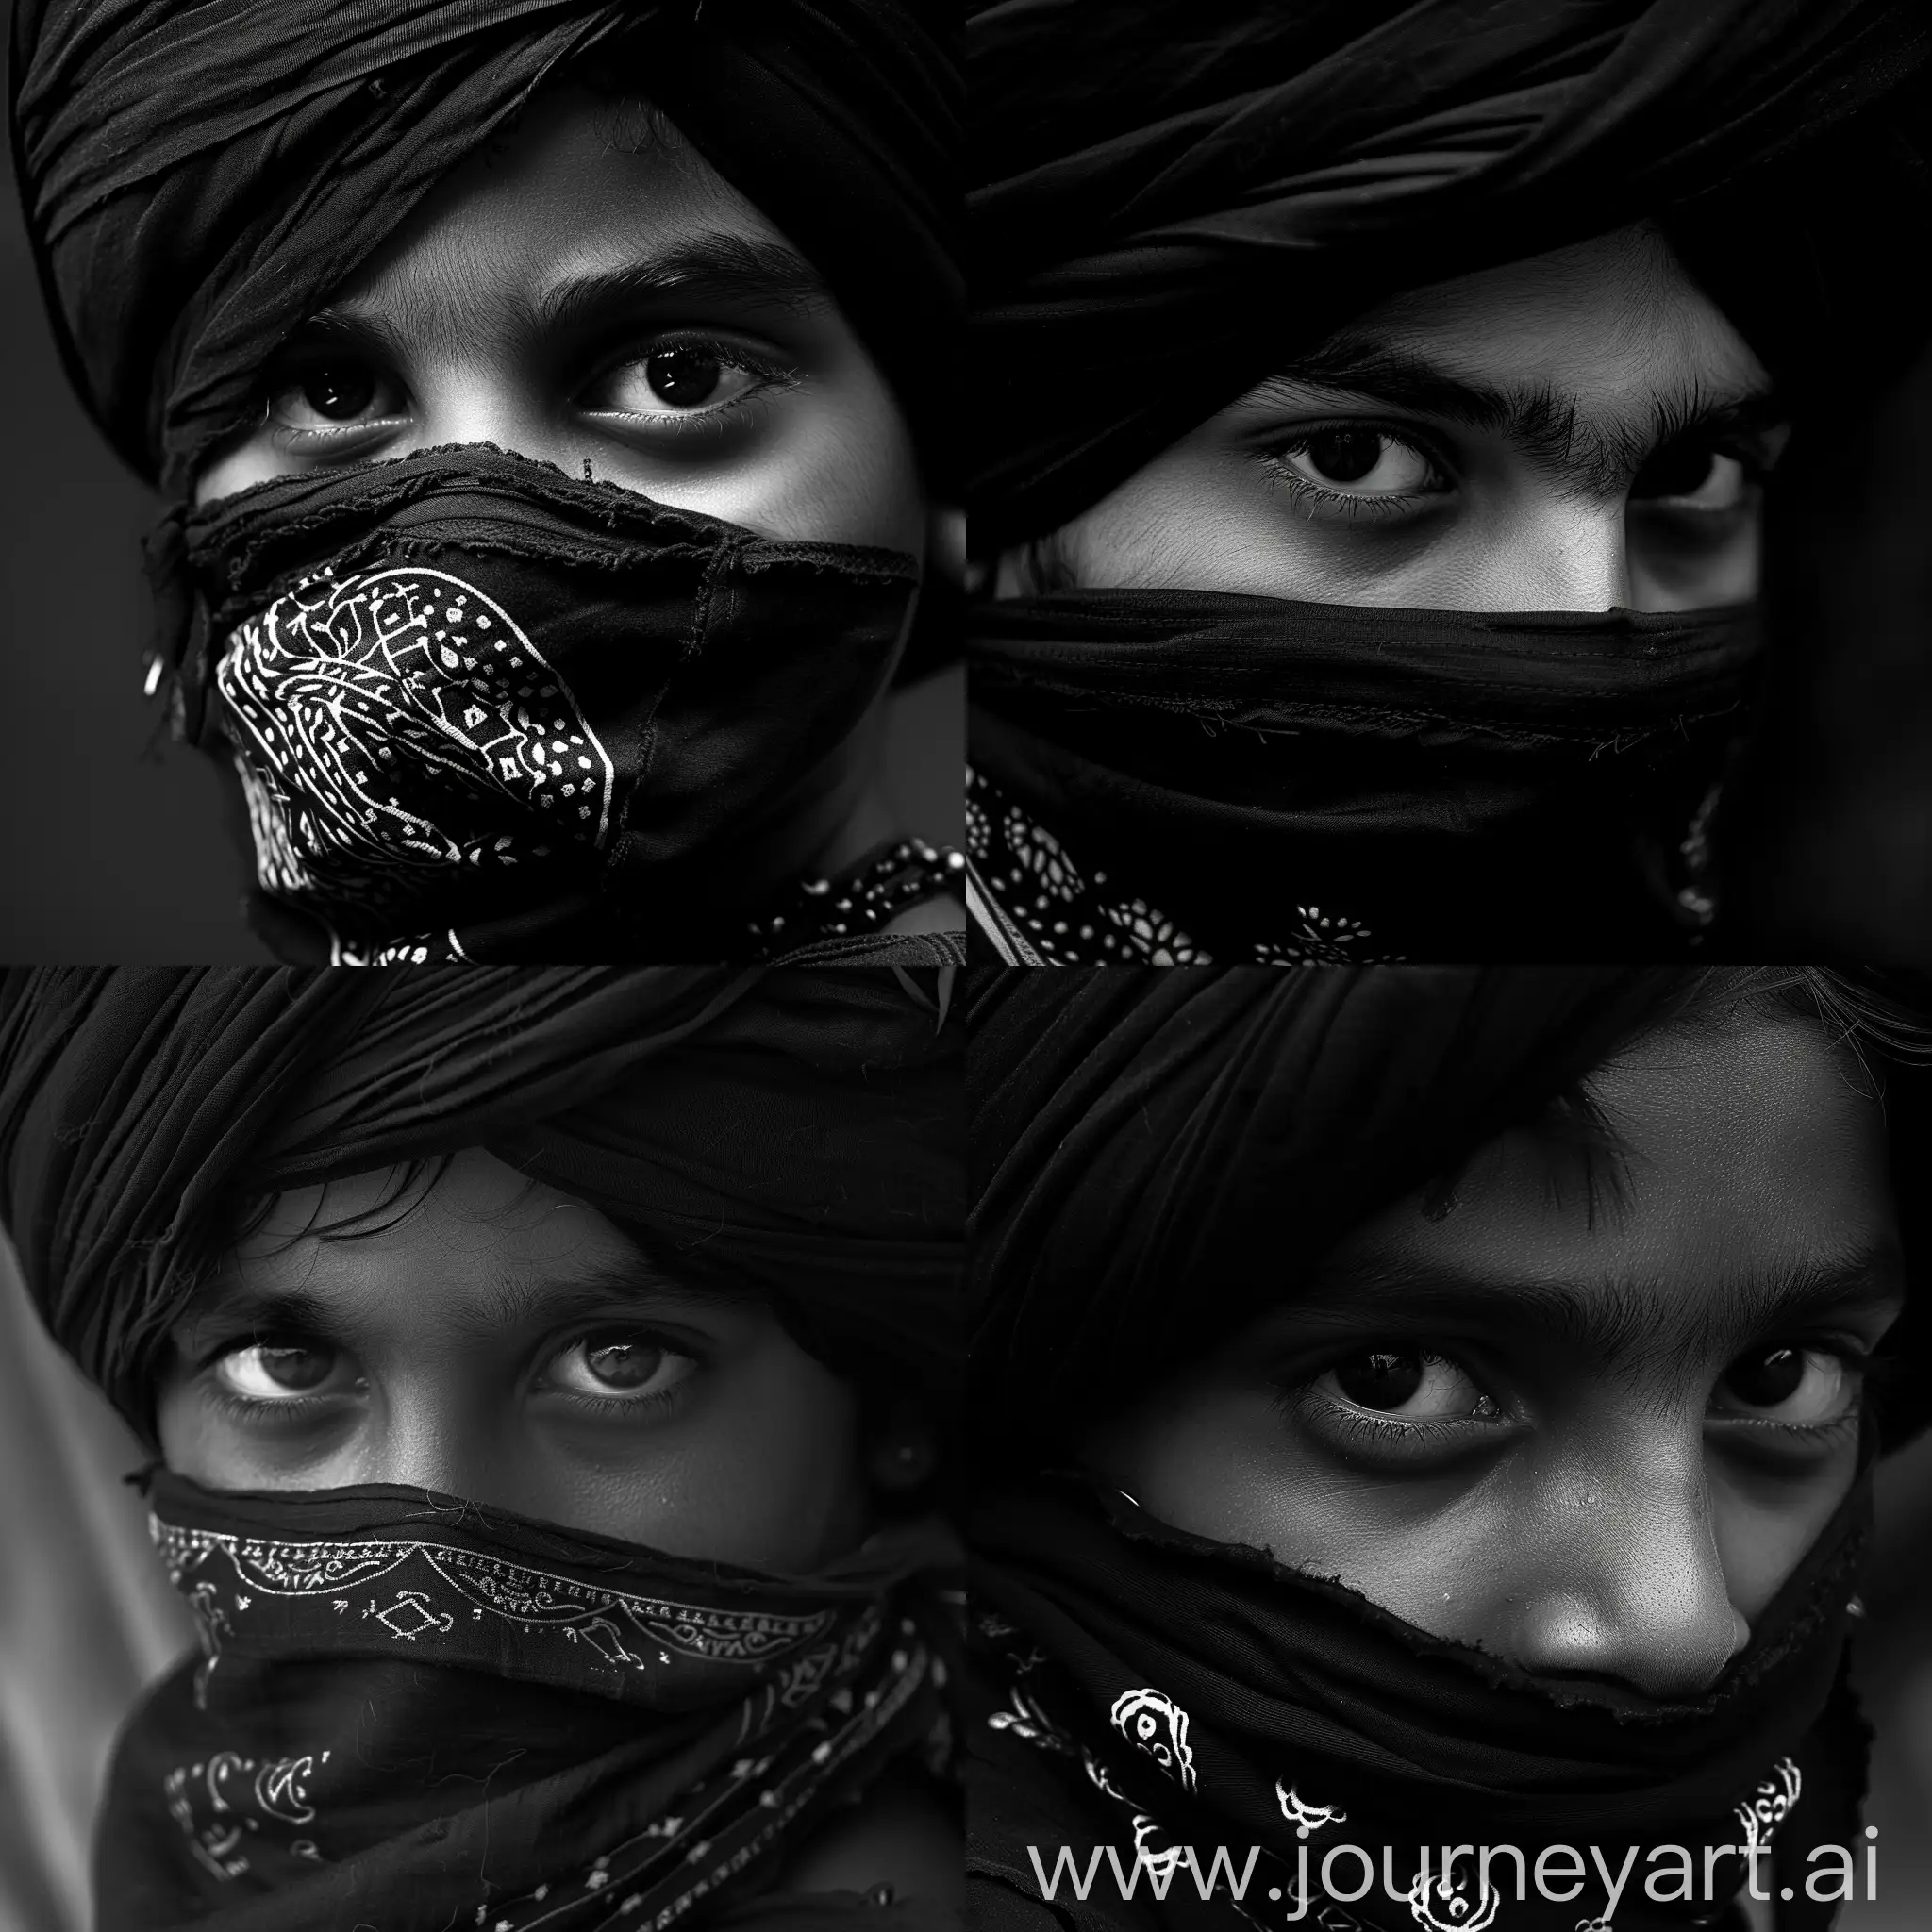 A sikh boy wearing black turban and bandana,his age Is 15 years old,black and white,a little close up,professional photographic style.